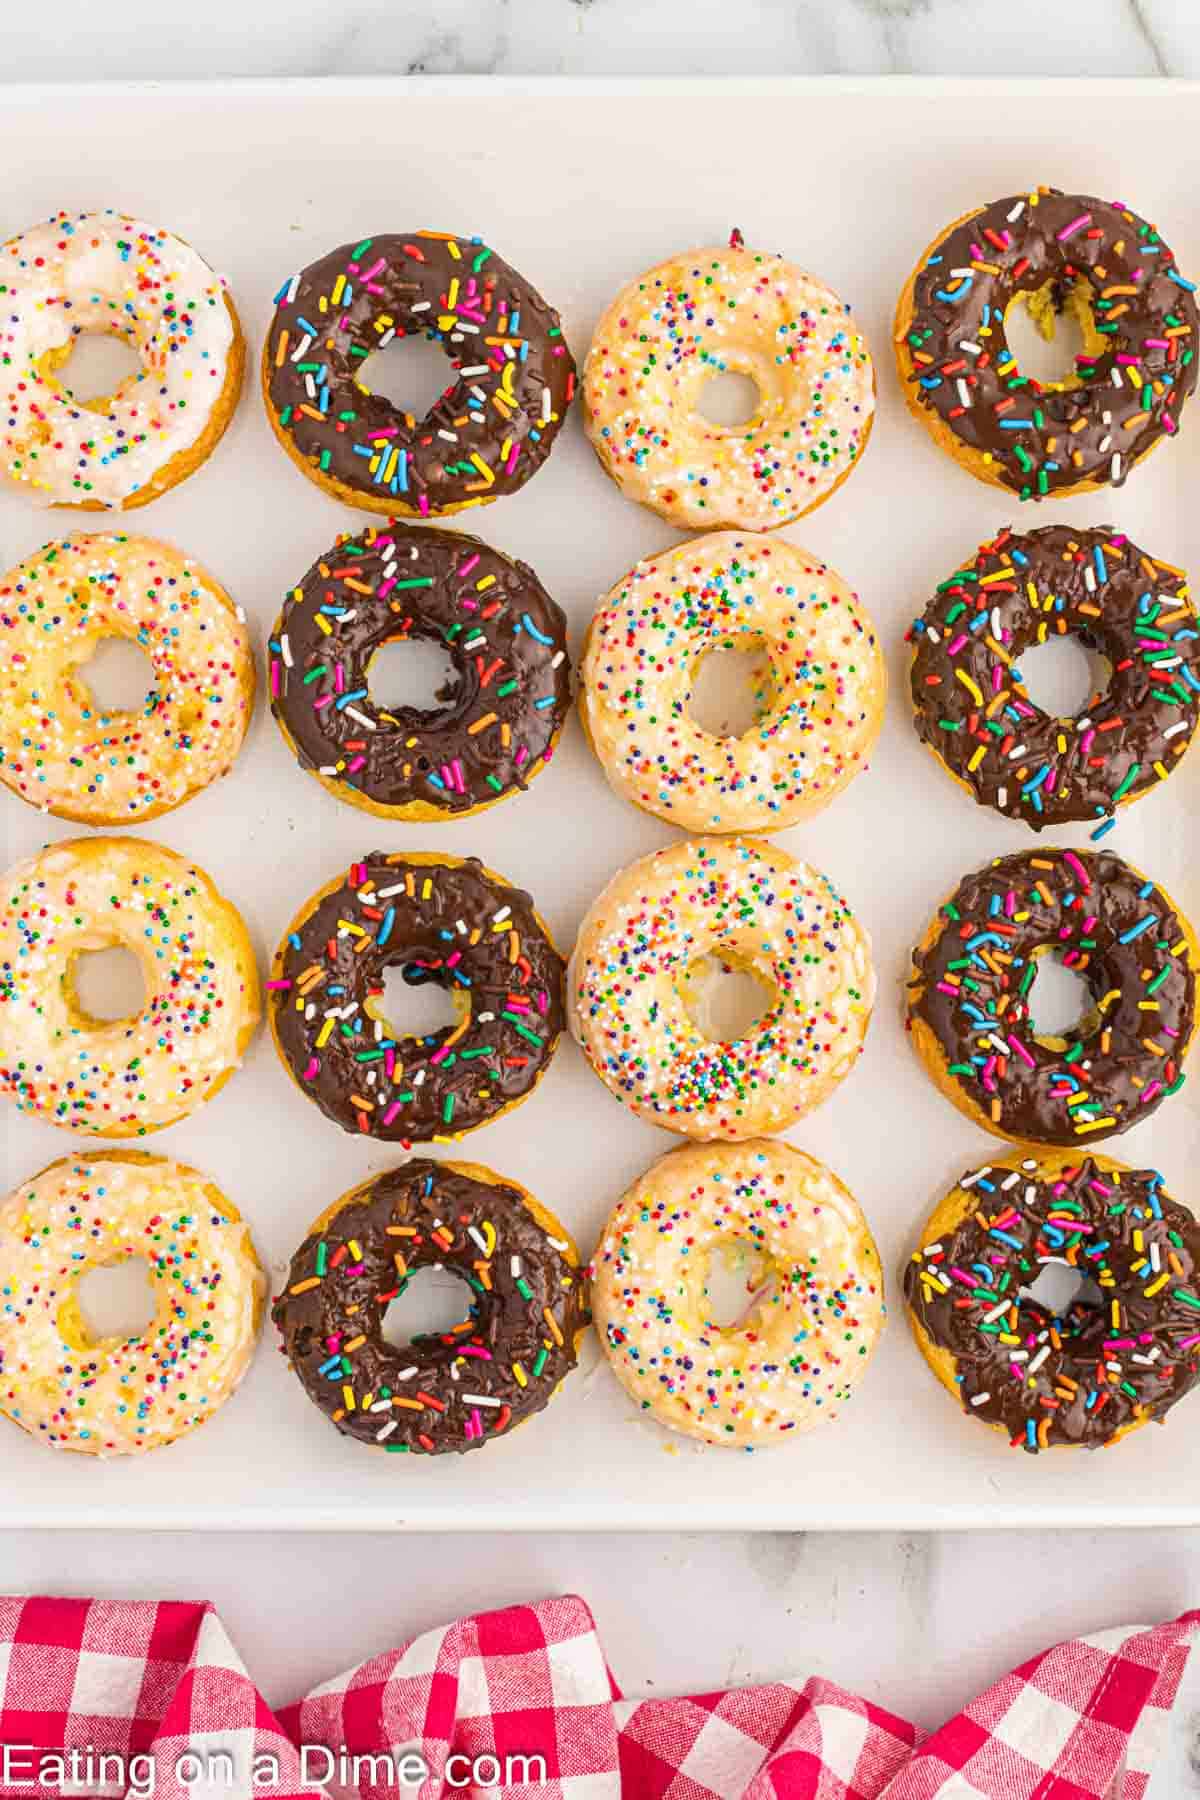 Chocolate and Vanilla Glazed Donuts with sprinkles on a platter